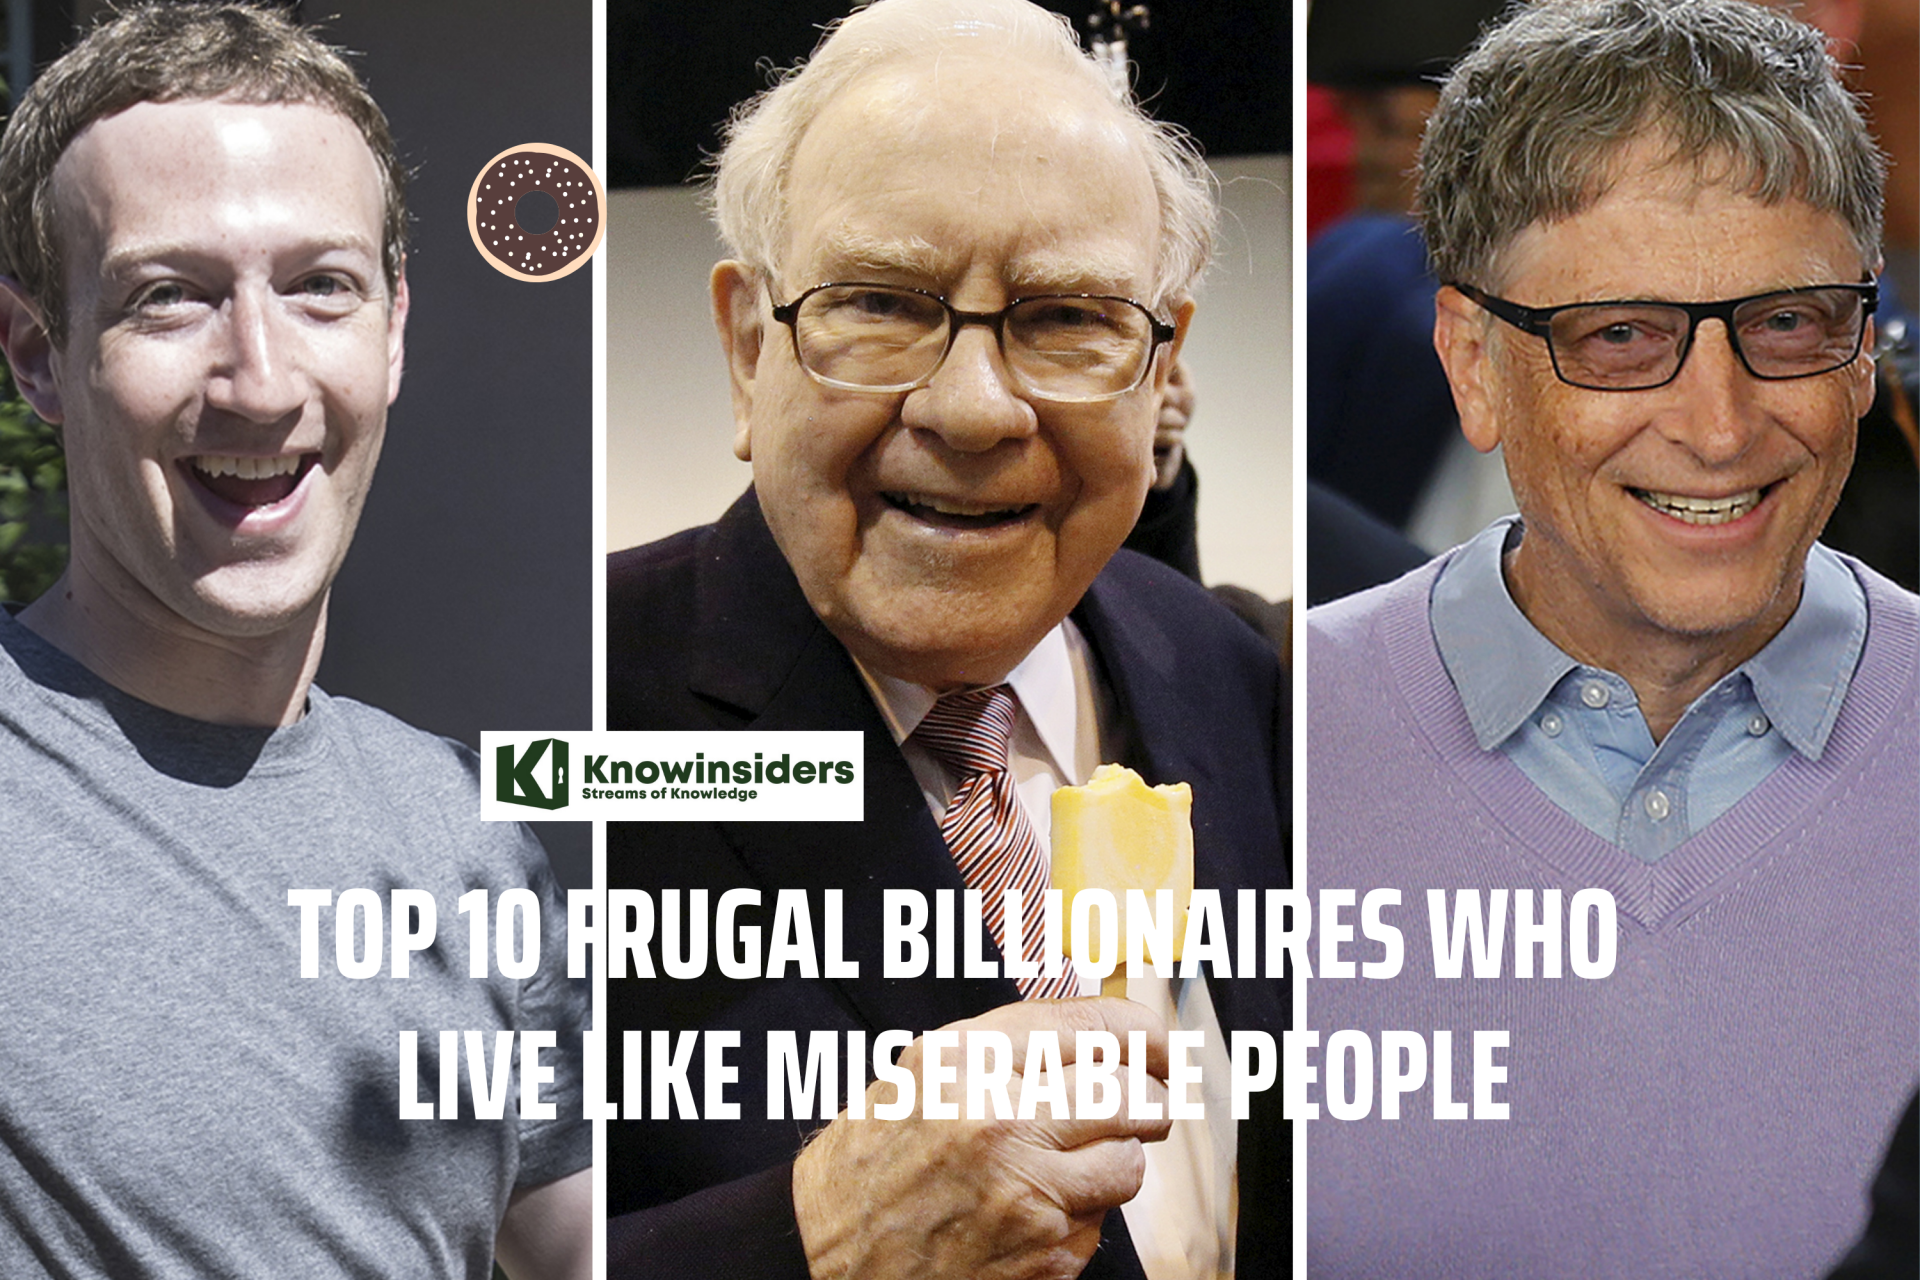 Top 10 Frugal Richest Billionaires Who Live Like Miserable People